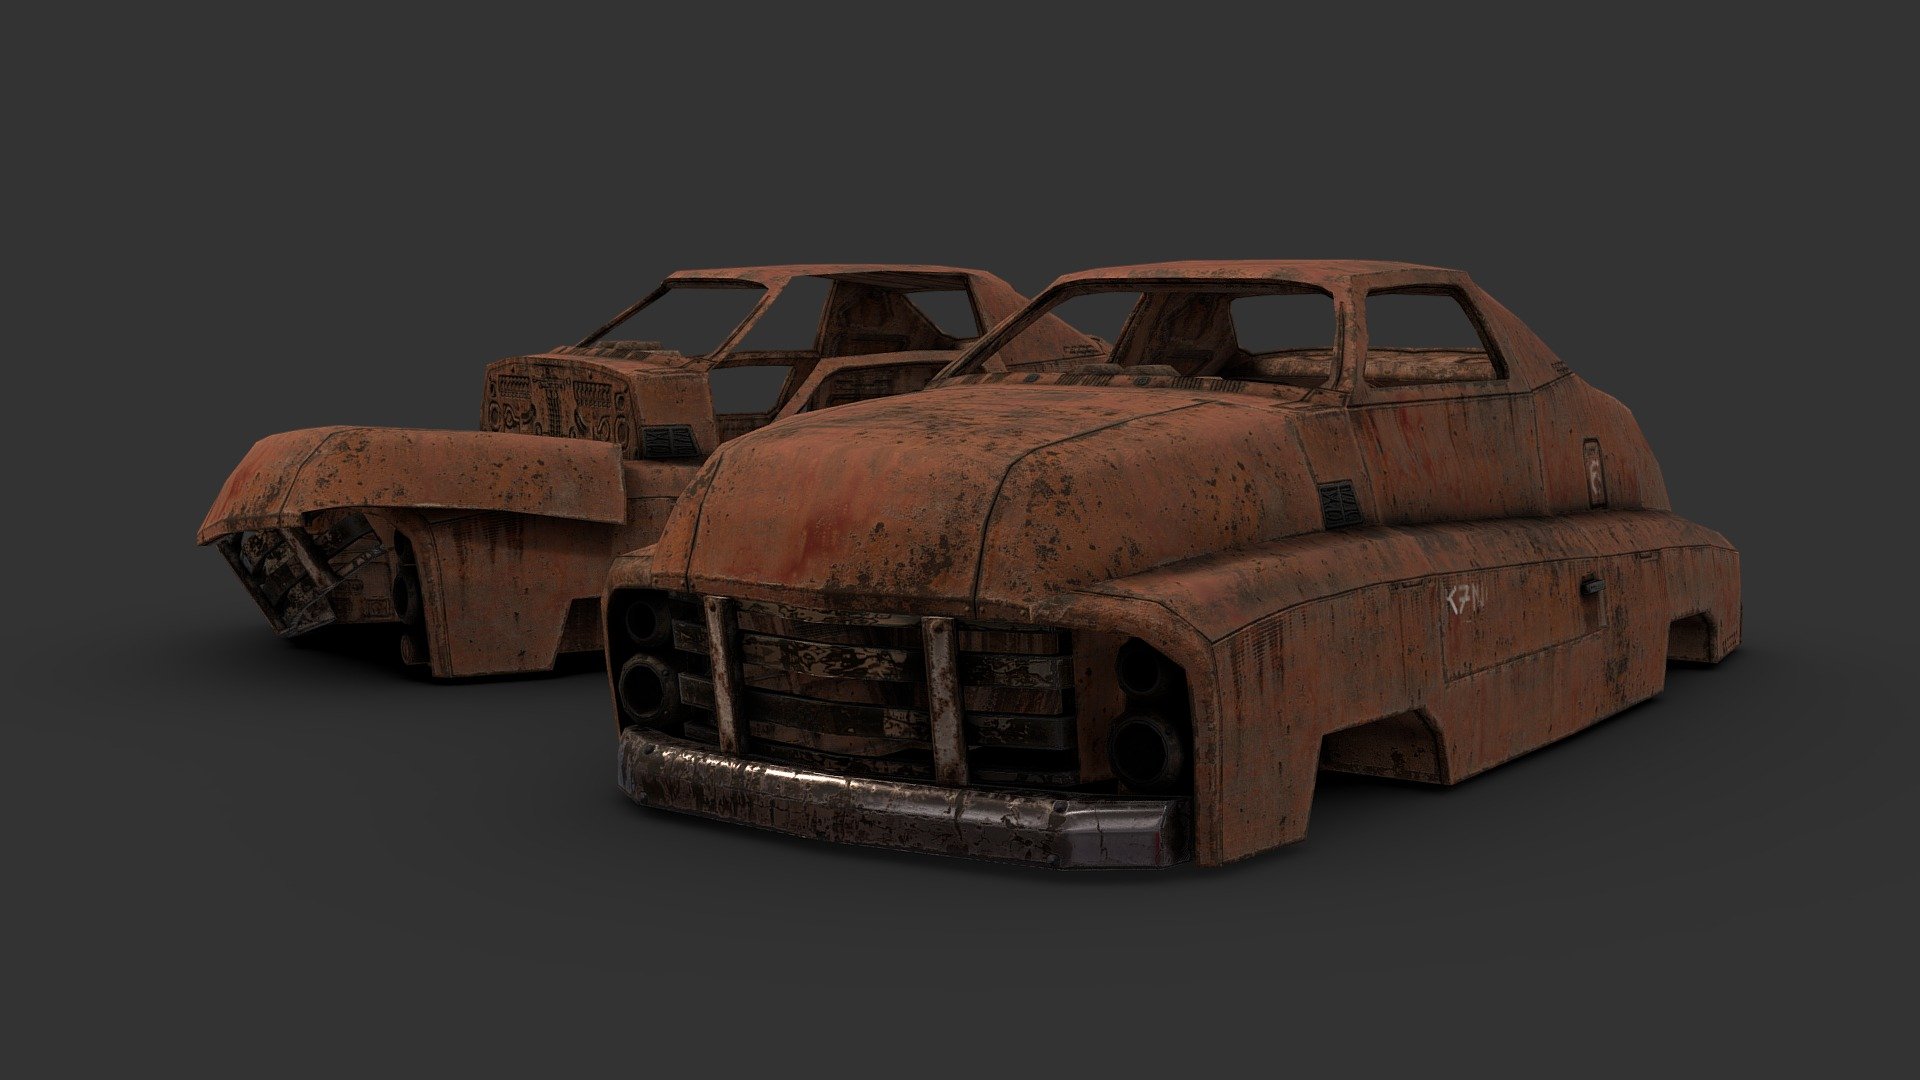 A re-imagining of my old 3D model: https://skfb.ly/S7MZ

Made in 3DSMax and Substance Painter - Derelict Dieselpunk Car - Download Free 3D model by Renafox (@kryik1023) 3d model